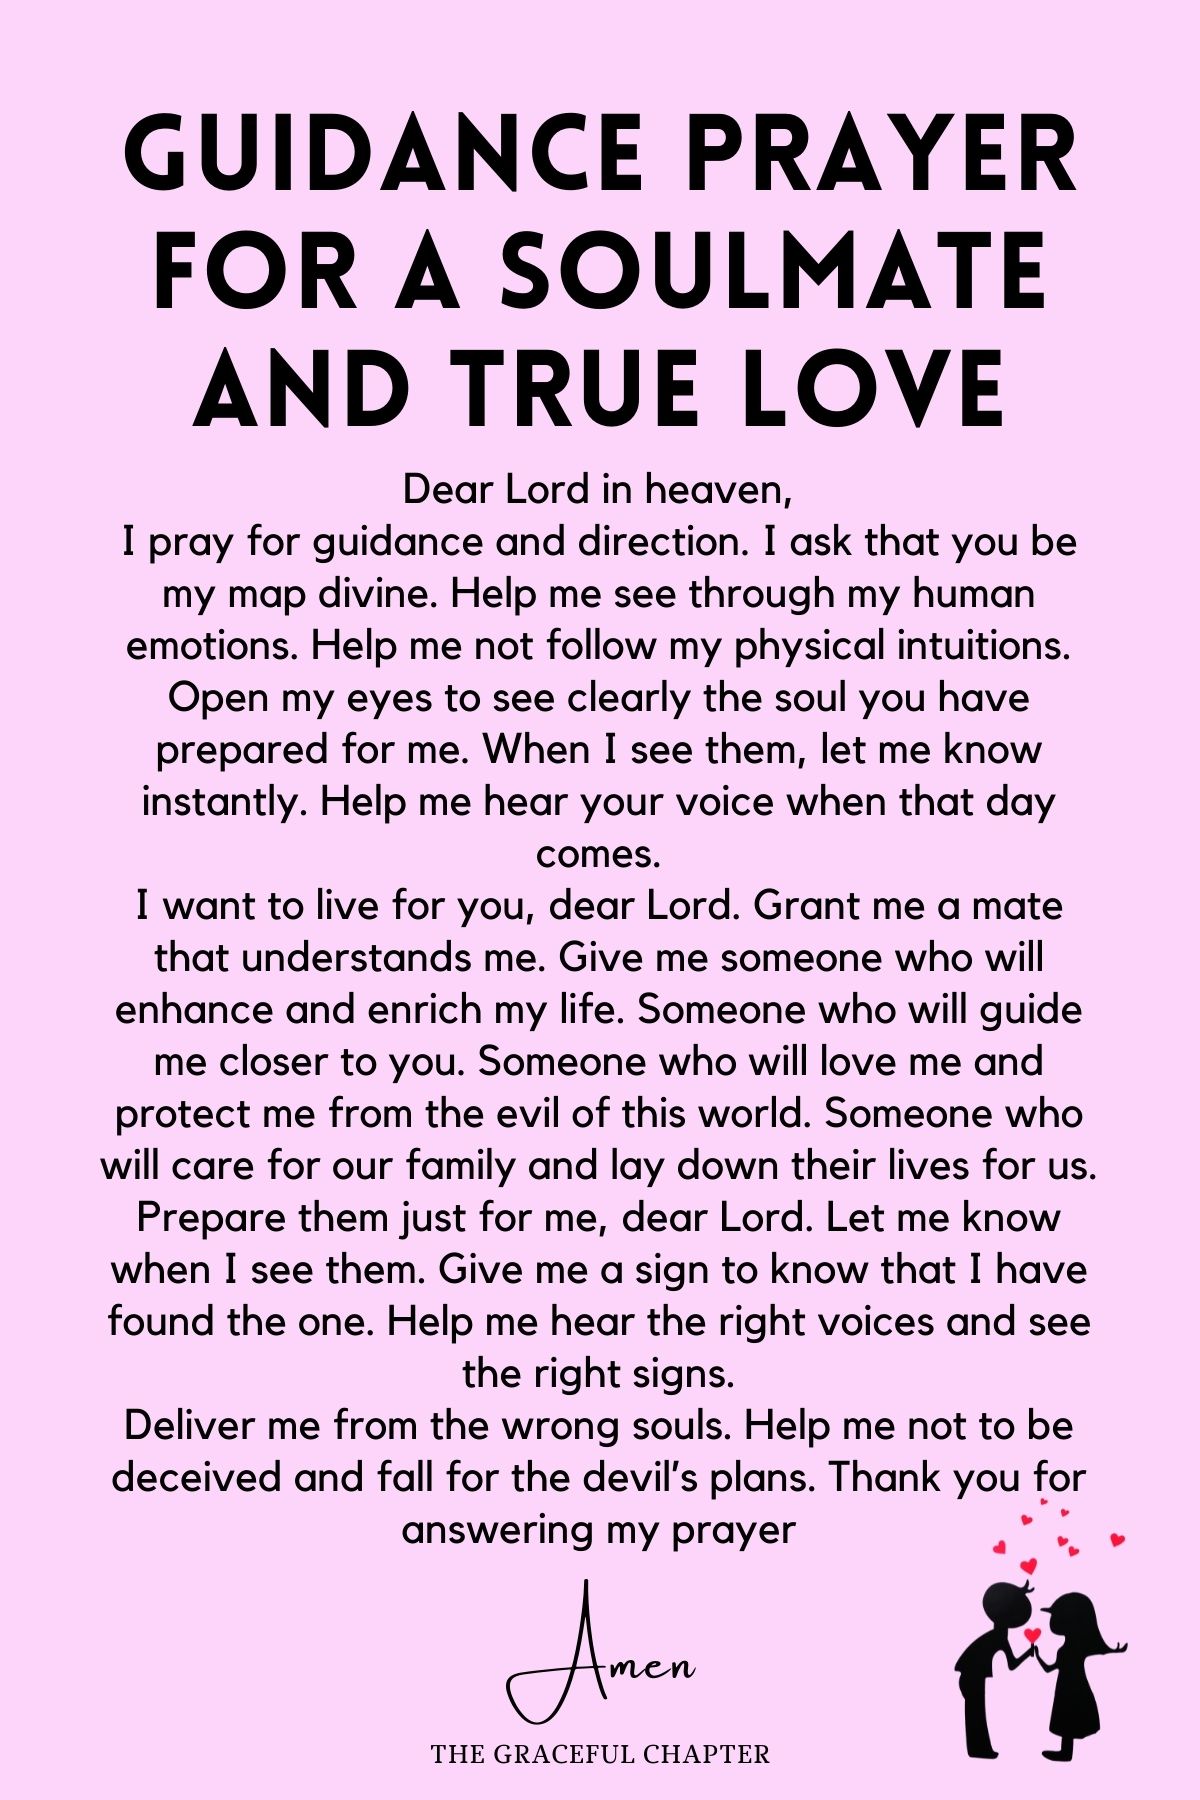 Guidance prayer for a soulmate and true love